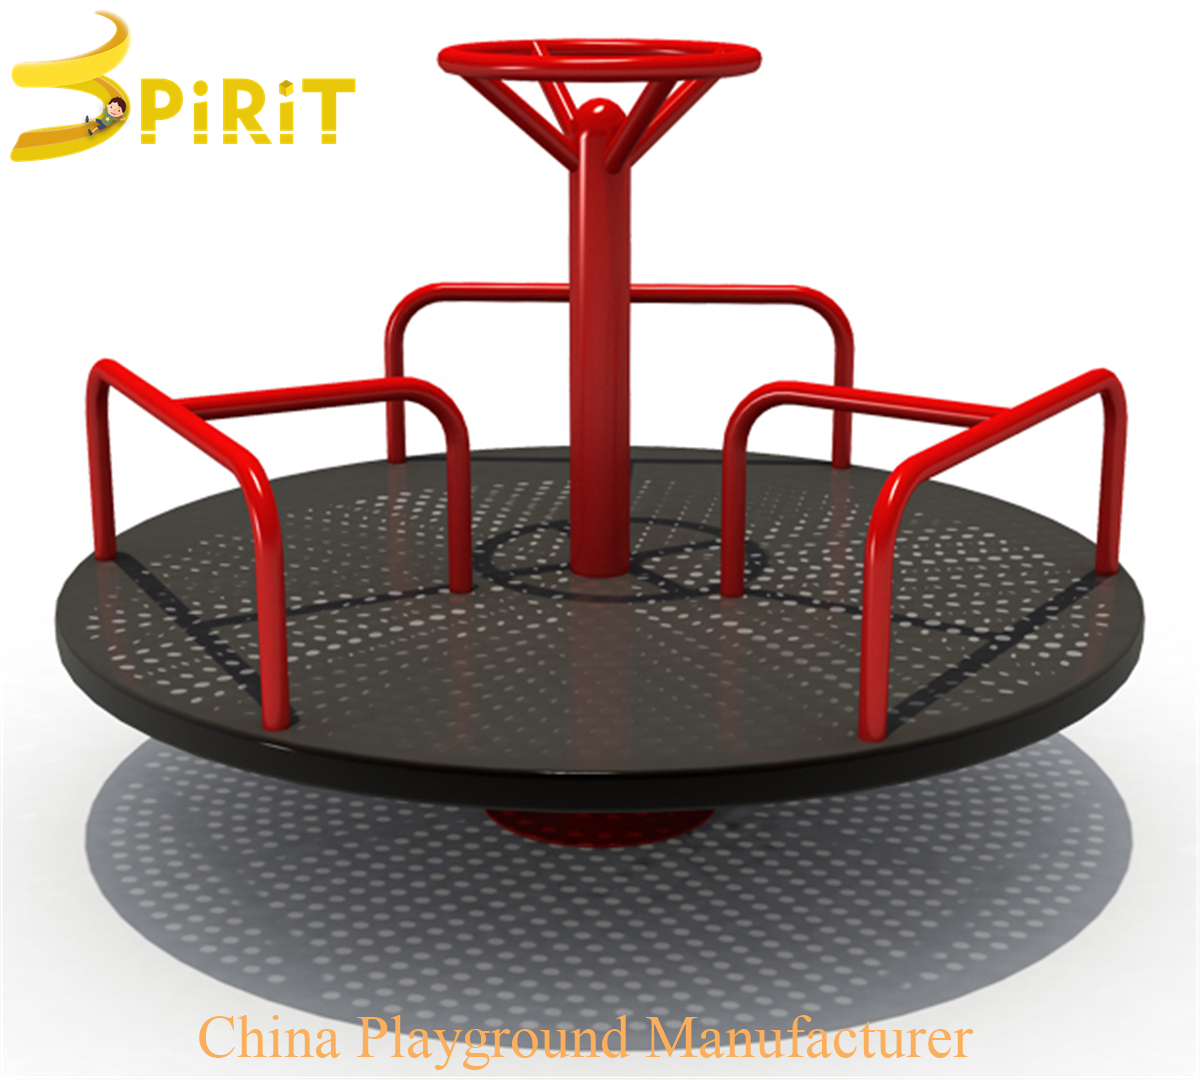 Best independent play autism for sale.-SPIRIT PLAY,Outdoor Playground, Indoor Playground,Trampoline Park,Outdoor Fitness,Inflatable,Soft Playground,Ninja Warrior,Trampoline Park,Playground Structure,Play Structure,Outdoor Fitness,Water Park,Play System,Freestanding,Interactive,independente ,Inklusibo, Park, Pagsaka sa Bungbong, Dula sa Bata